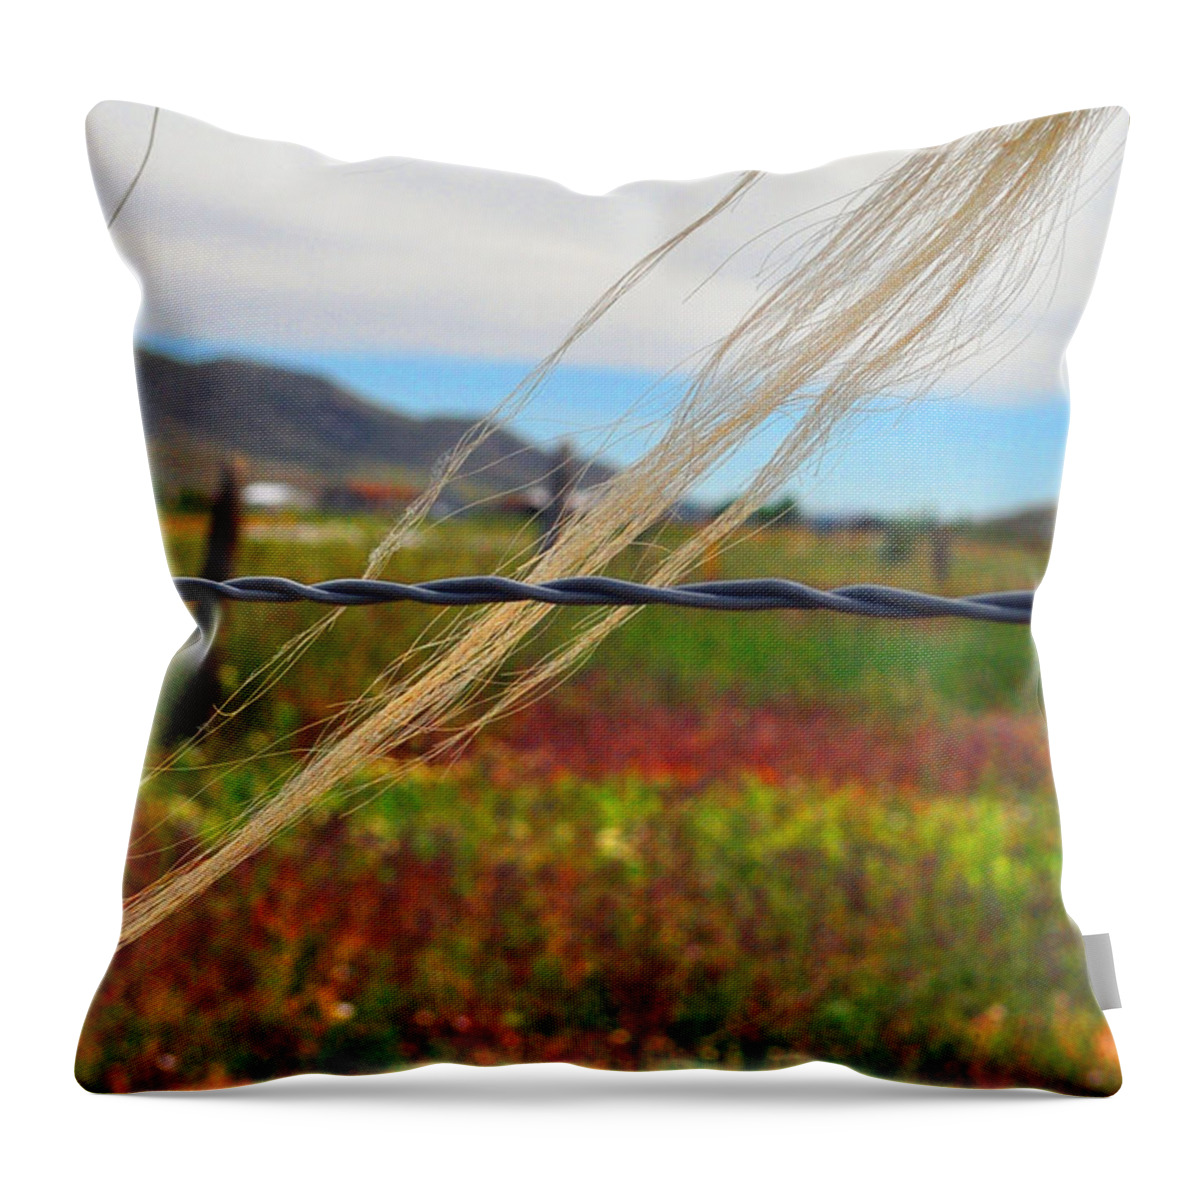 Horse Hair Throw Pillow featuring the photograph Equus Land by Lisa Holland-Gillem